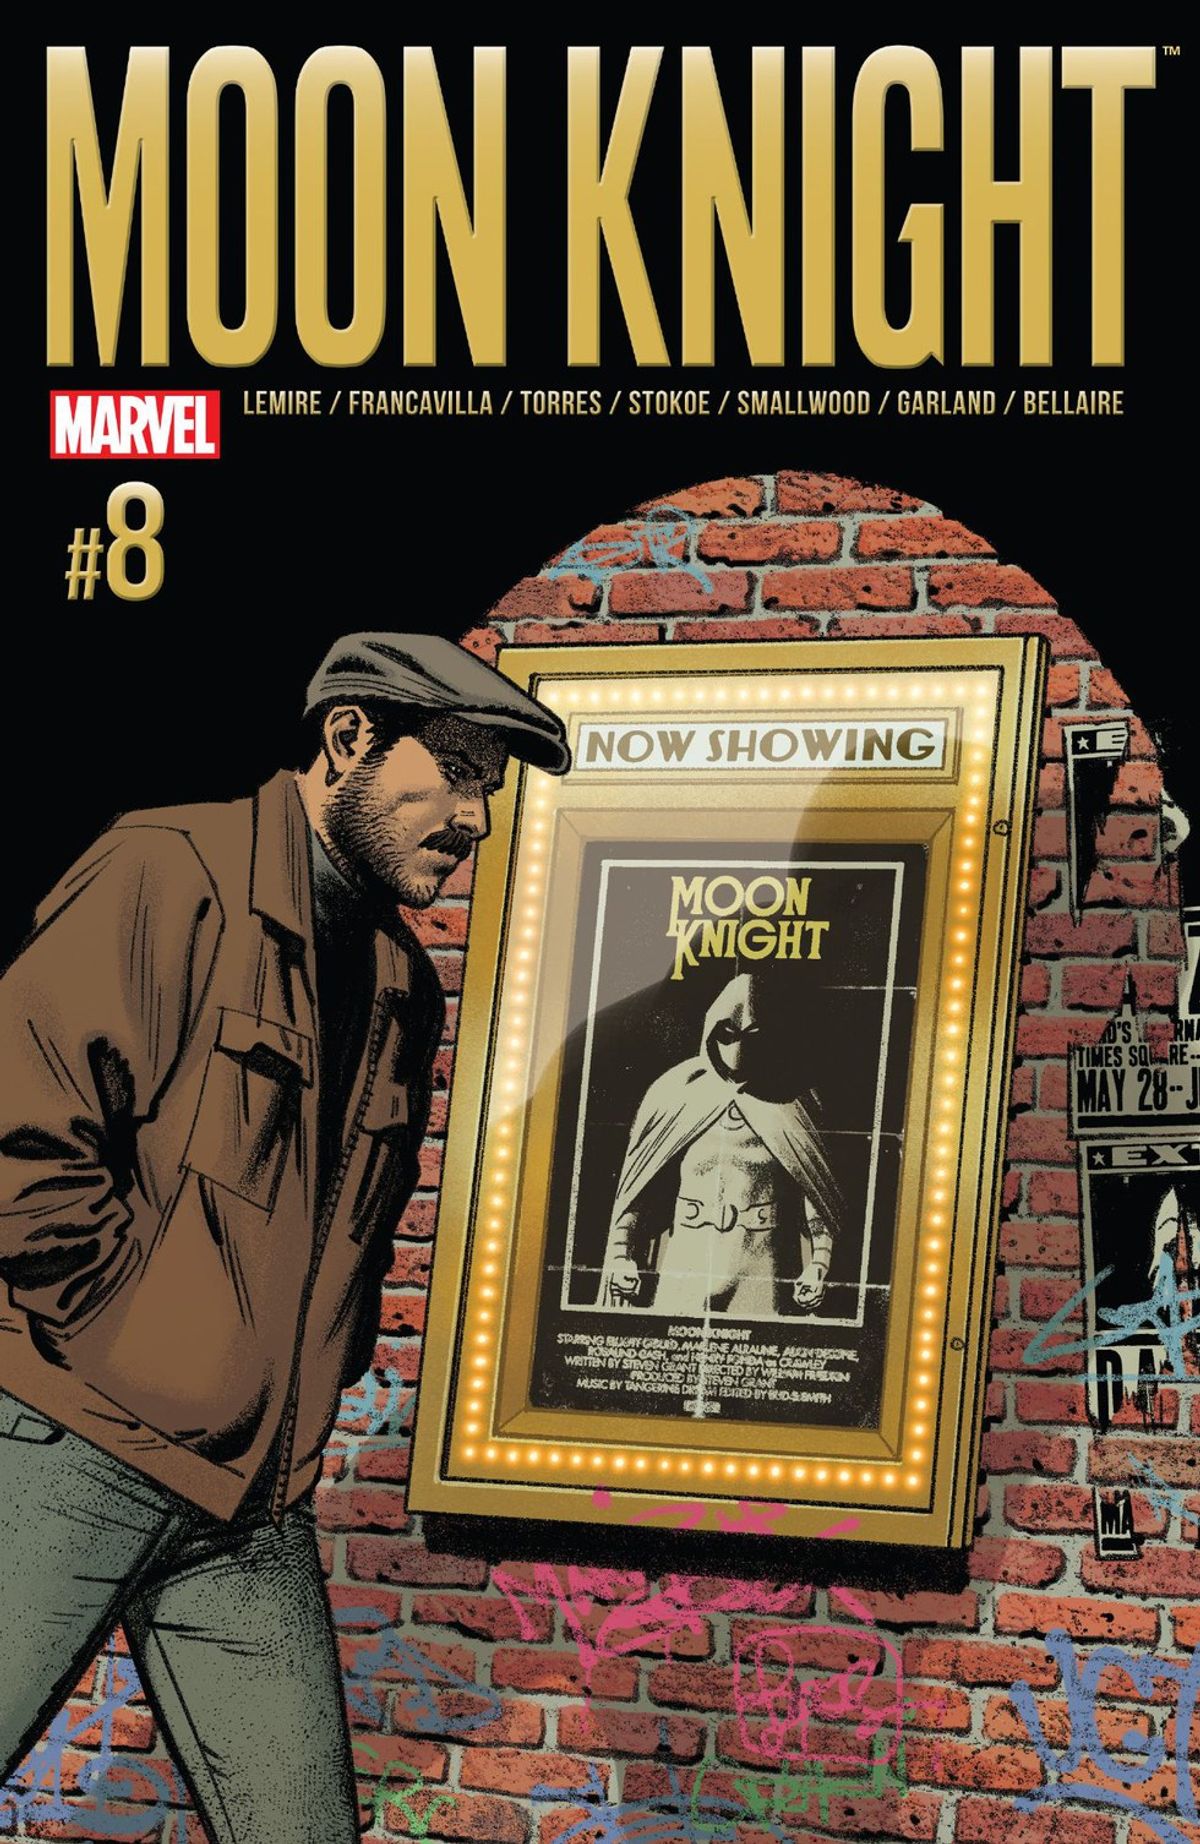 Comic Review: Moon Knight #8